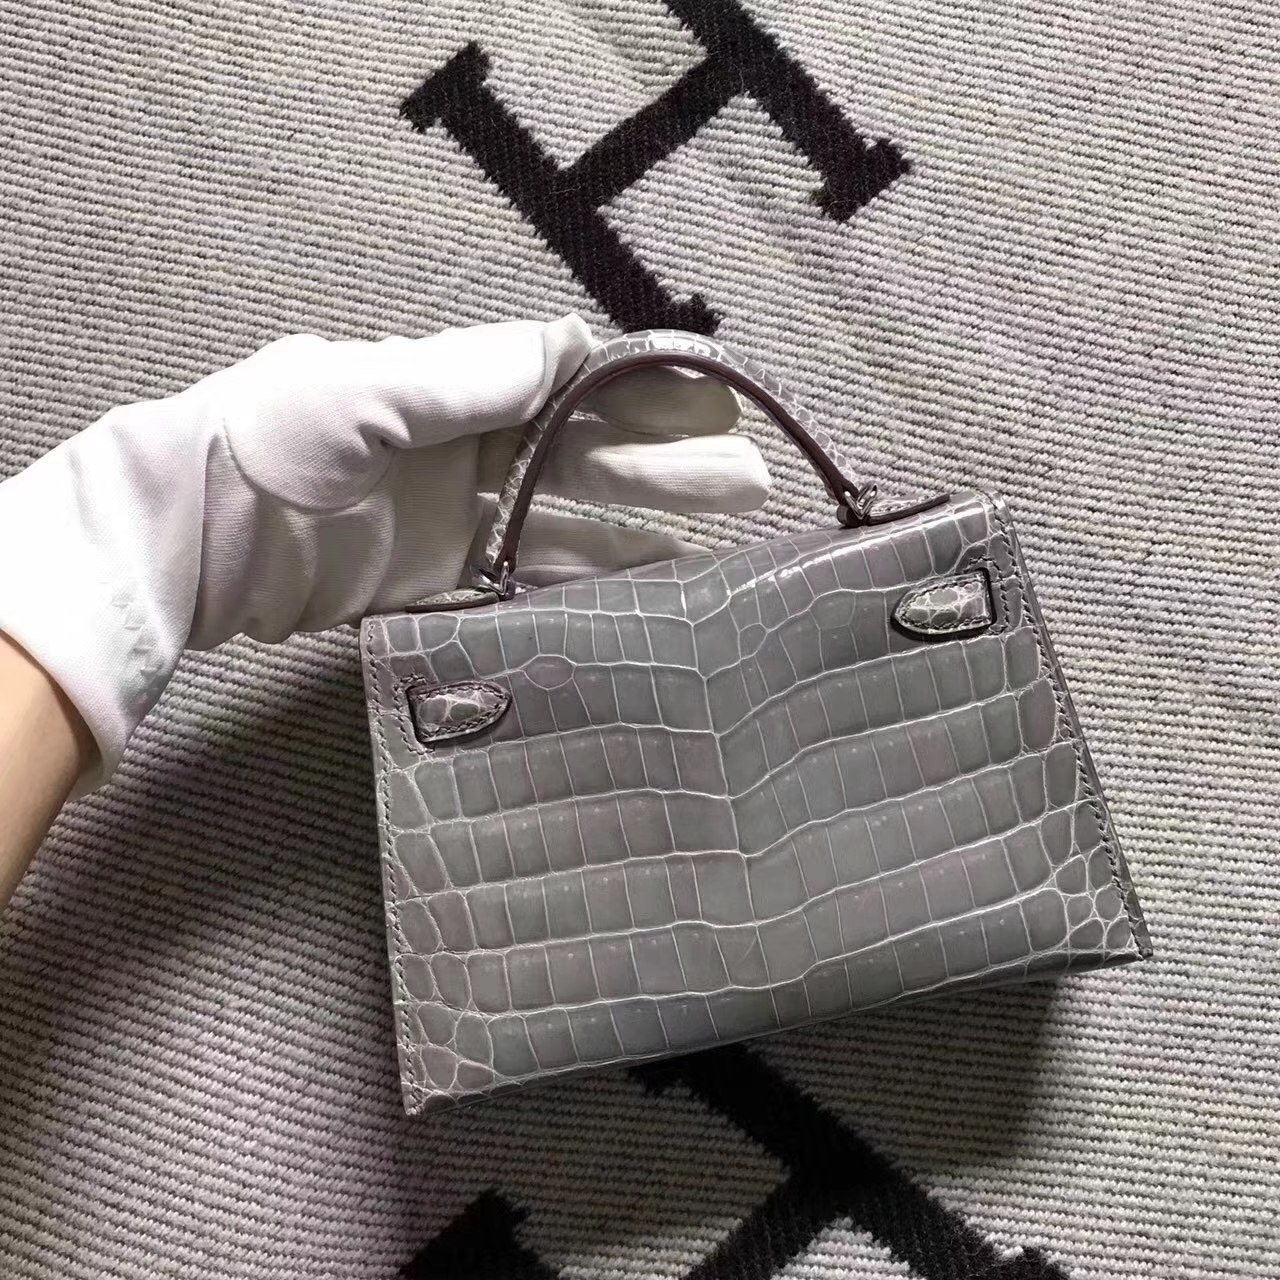 Wholesale Hermes Minikelly-2 Clutch Bag in CK81 Gris Tourterelle Crocodile Leather